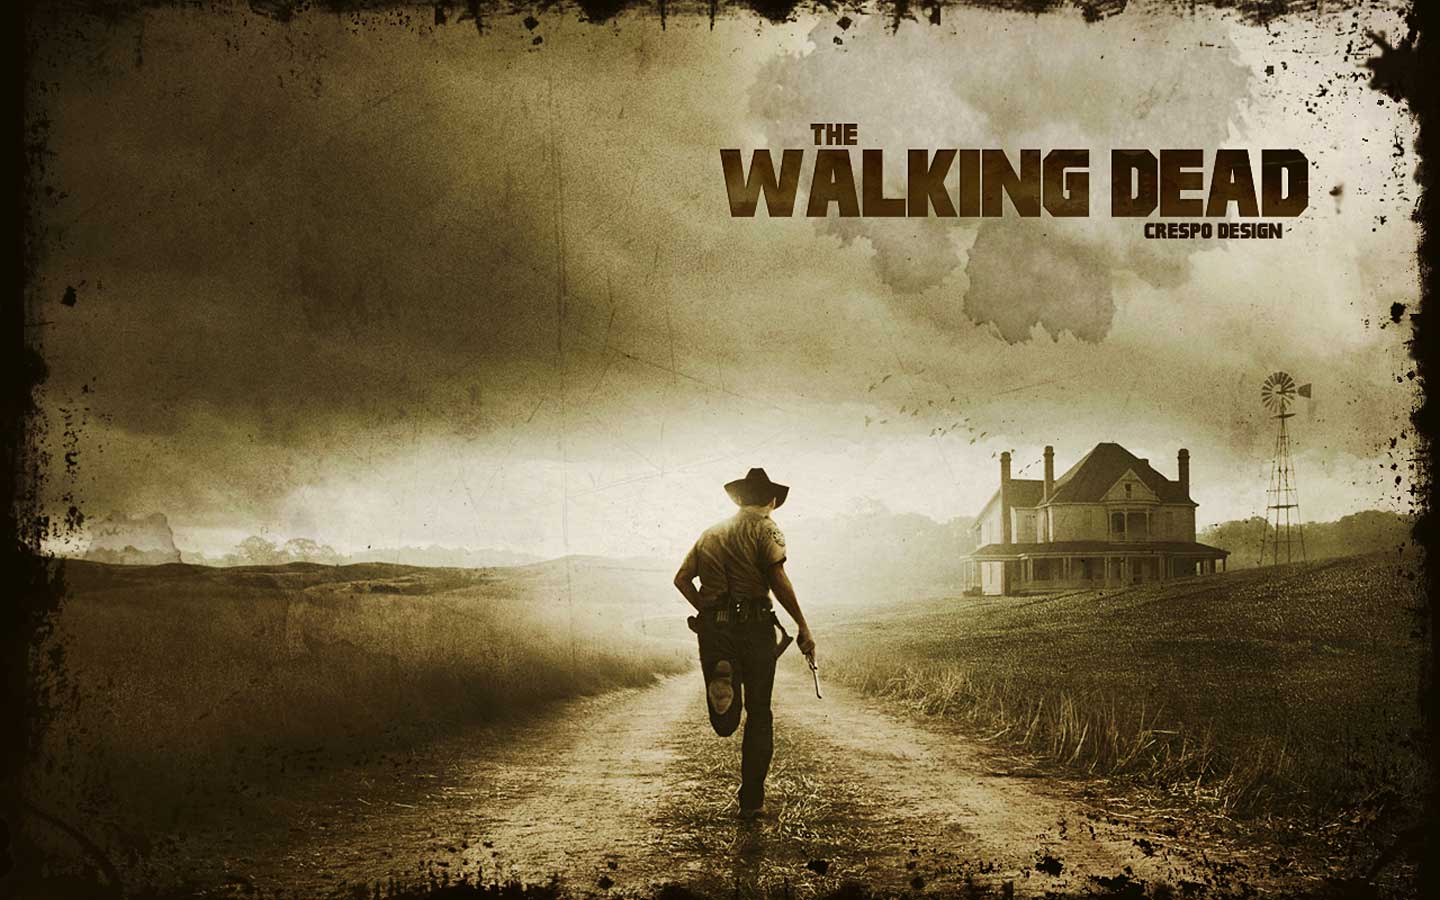 The Walking Dead Free Wallpapers - Wallpaper Cave